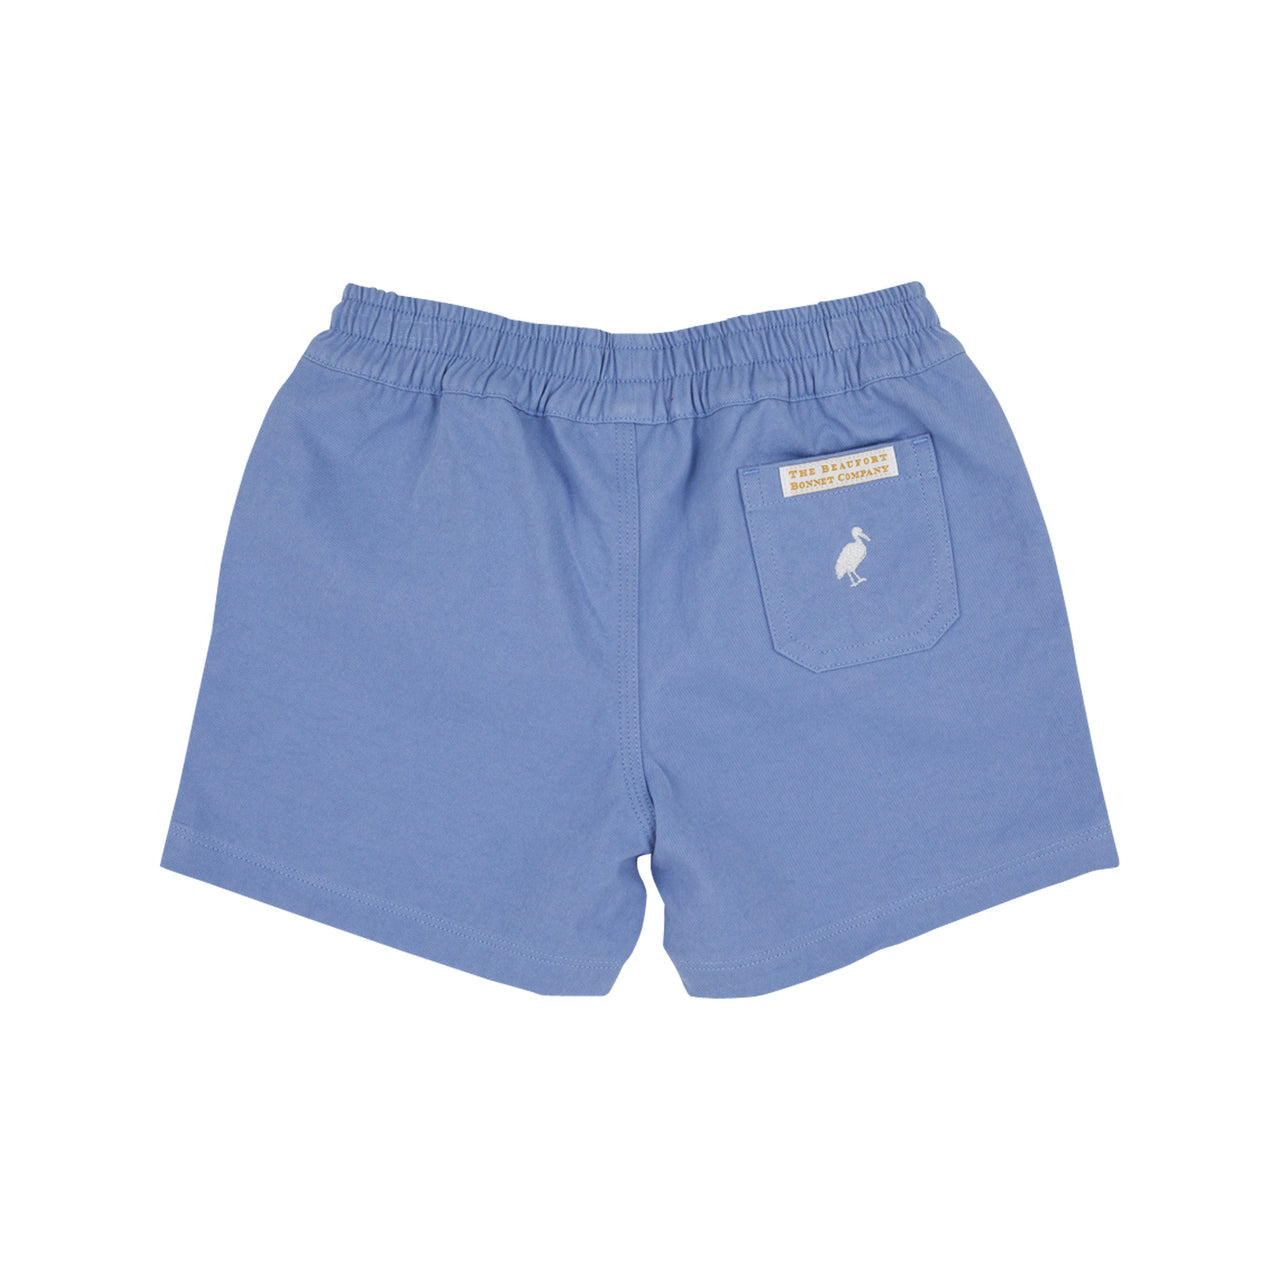 Sheffield Shorts | Park City Periwinkle With Worth Avenue White Stork